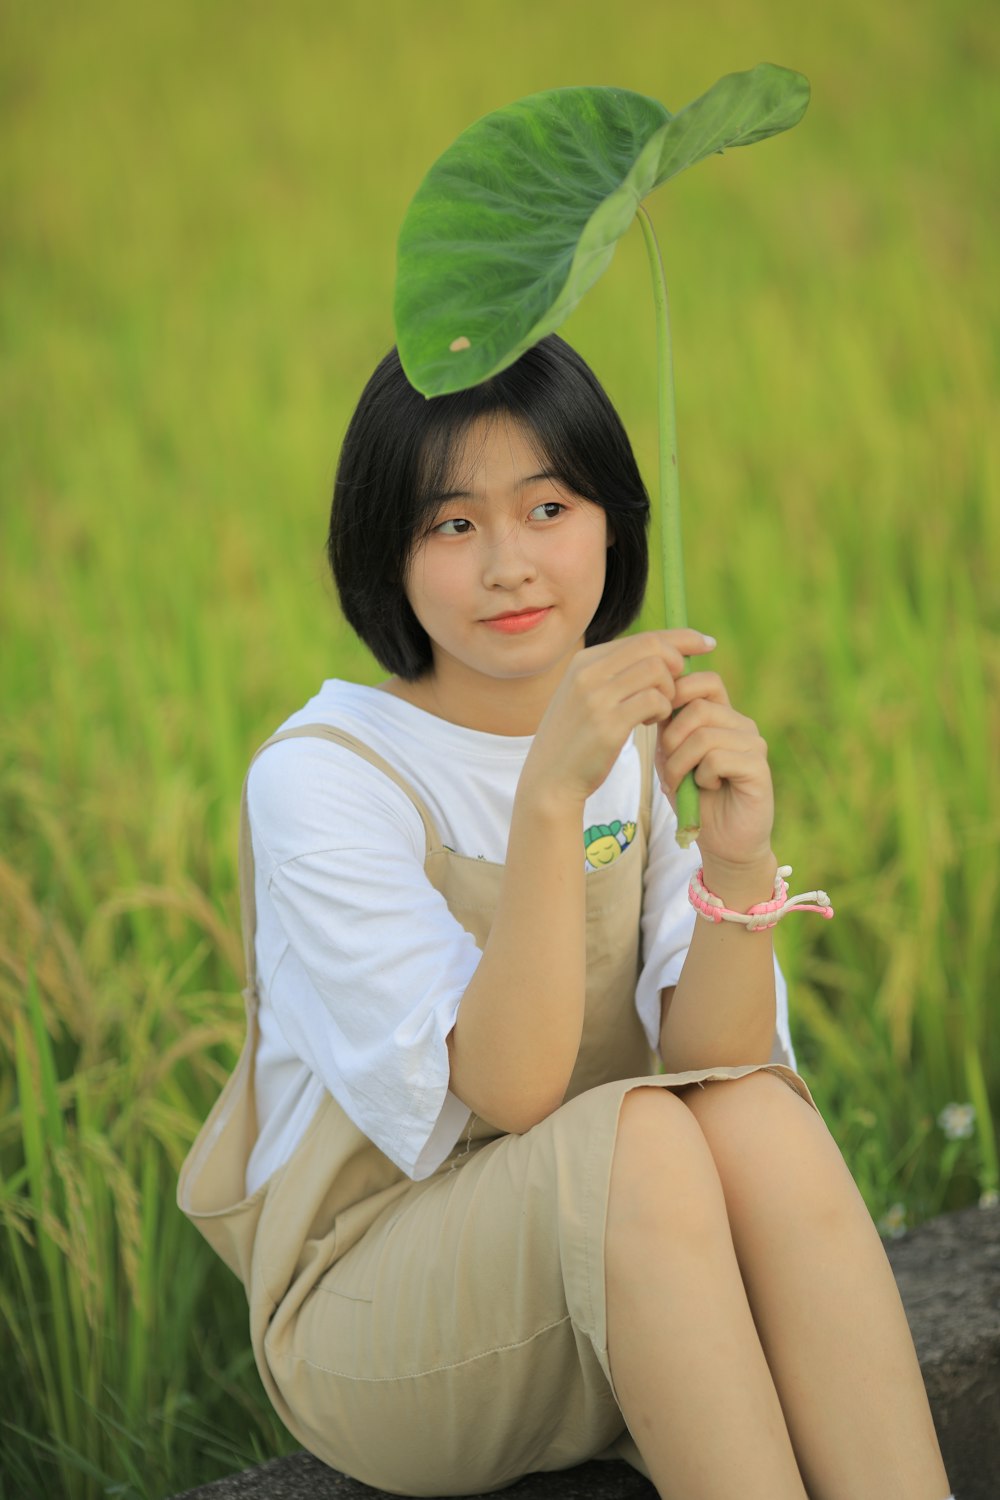 woman in white t-shirt and white shorts sitting on grass field holding green umbrella during